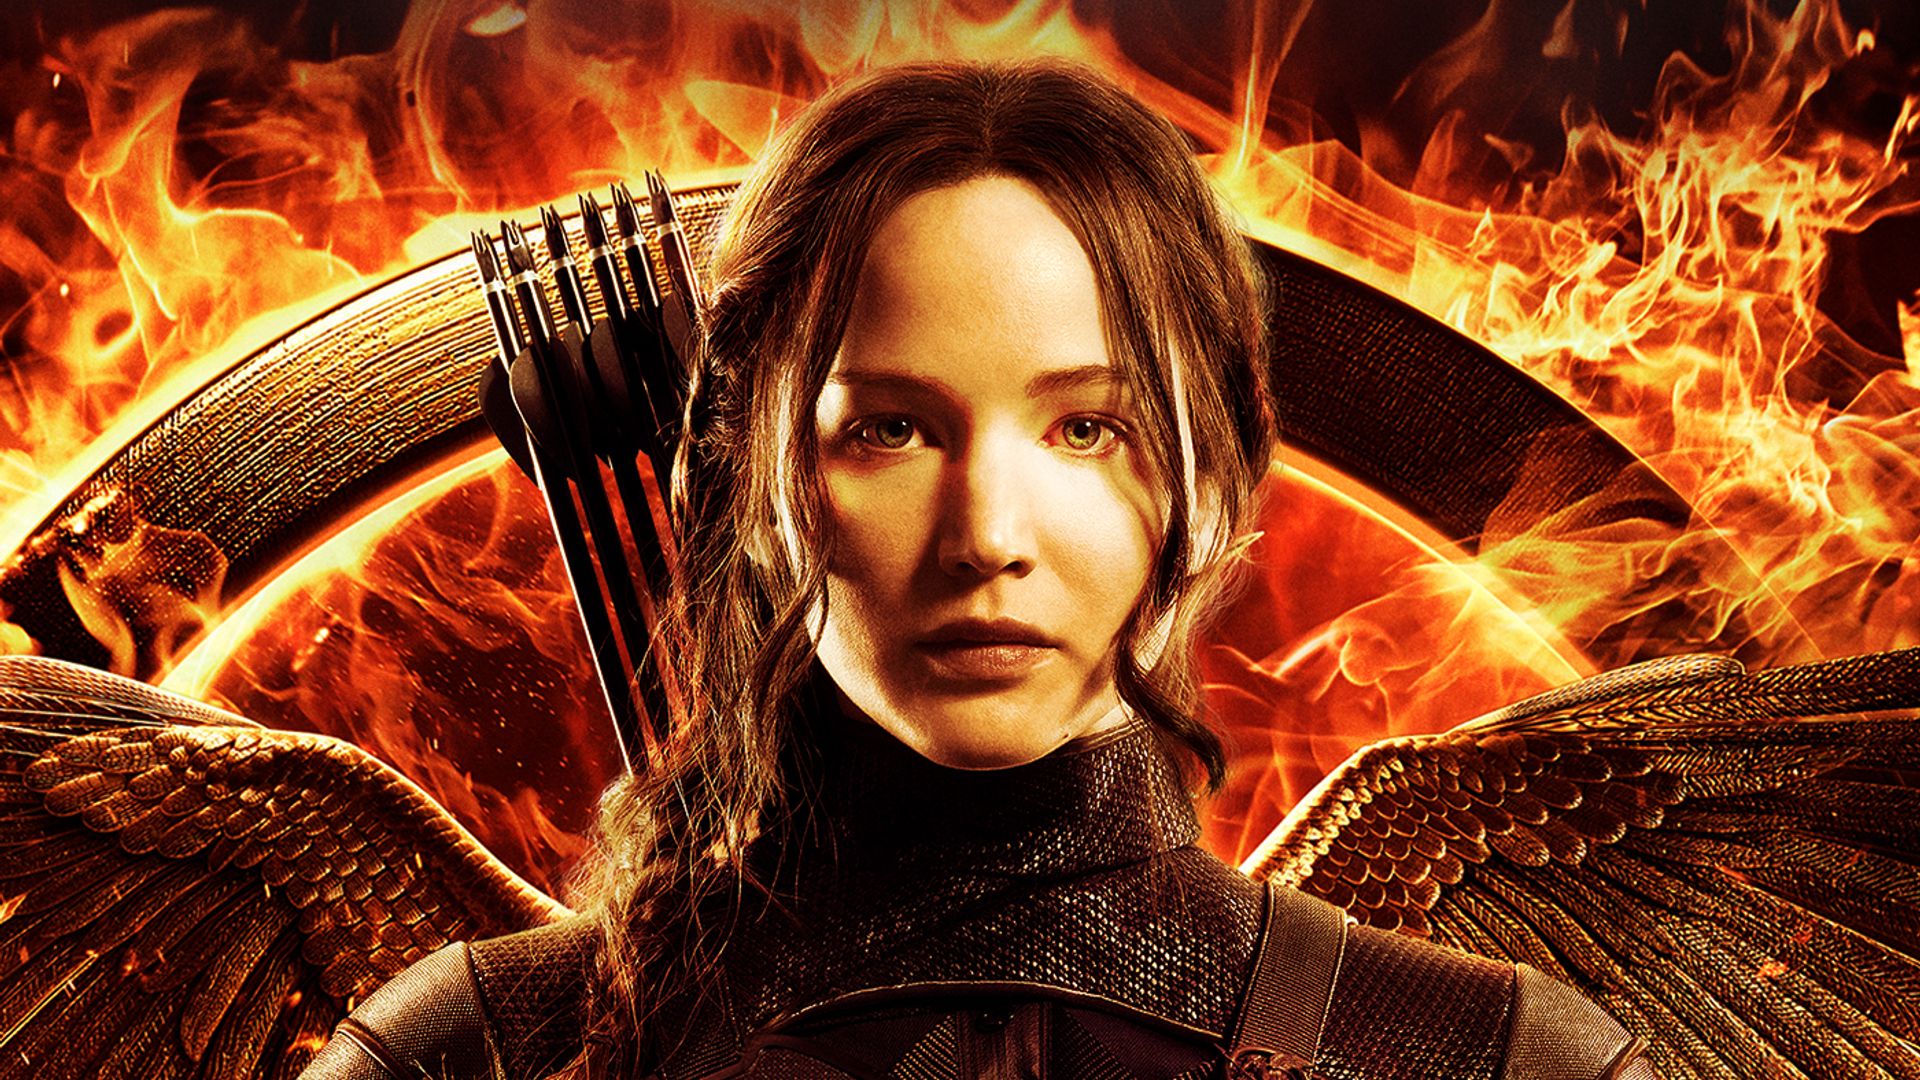 Hunger Games Prequel Movie: What We Know So Far